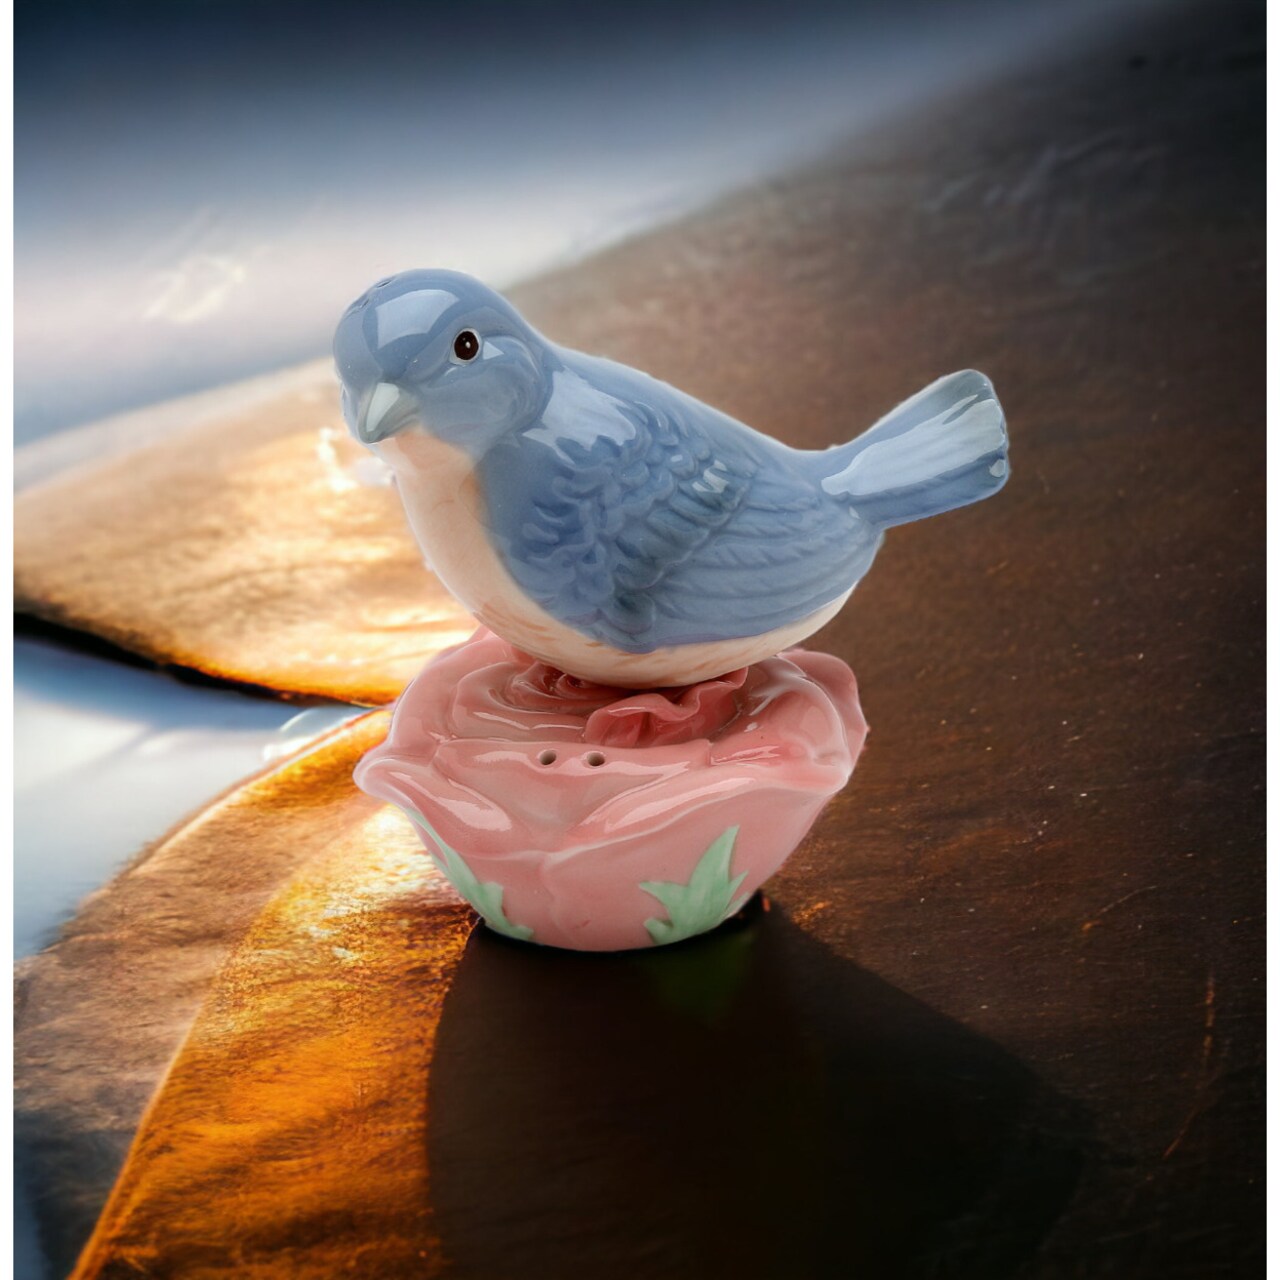 kevinsgiftshoppe Ceramic Bluebird and Rose Flower Magnetic Salt and Pepper  Shakers, Home Décor, Gift for Her, Gift for Mom, Kitchen